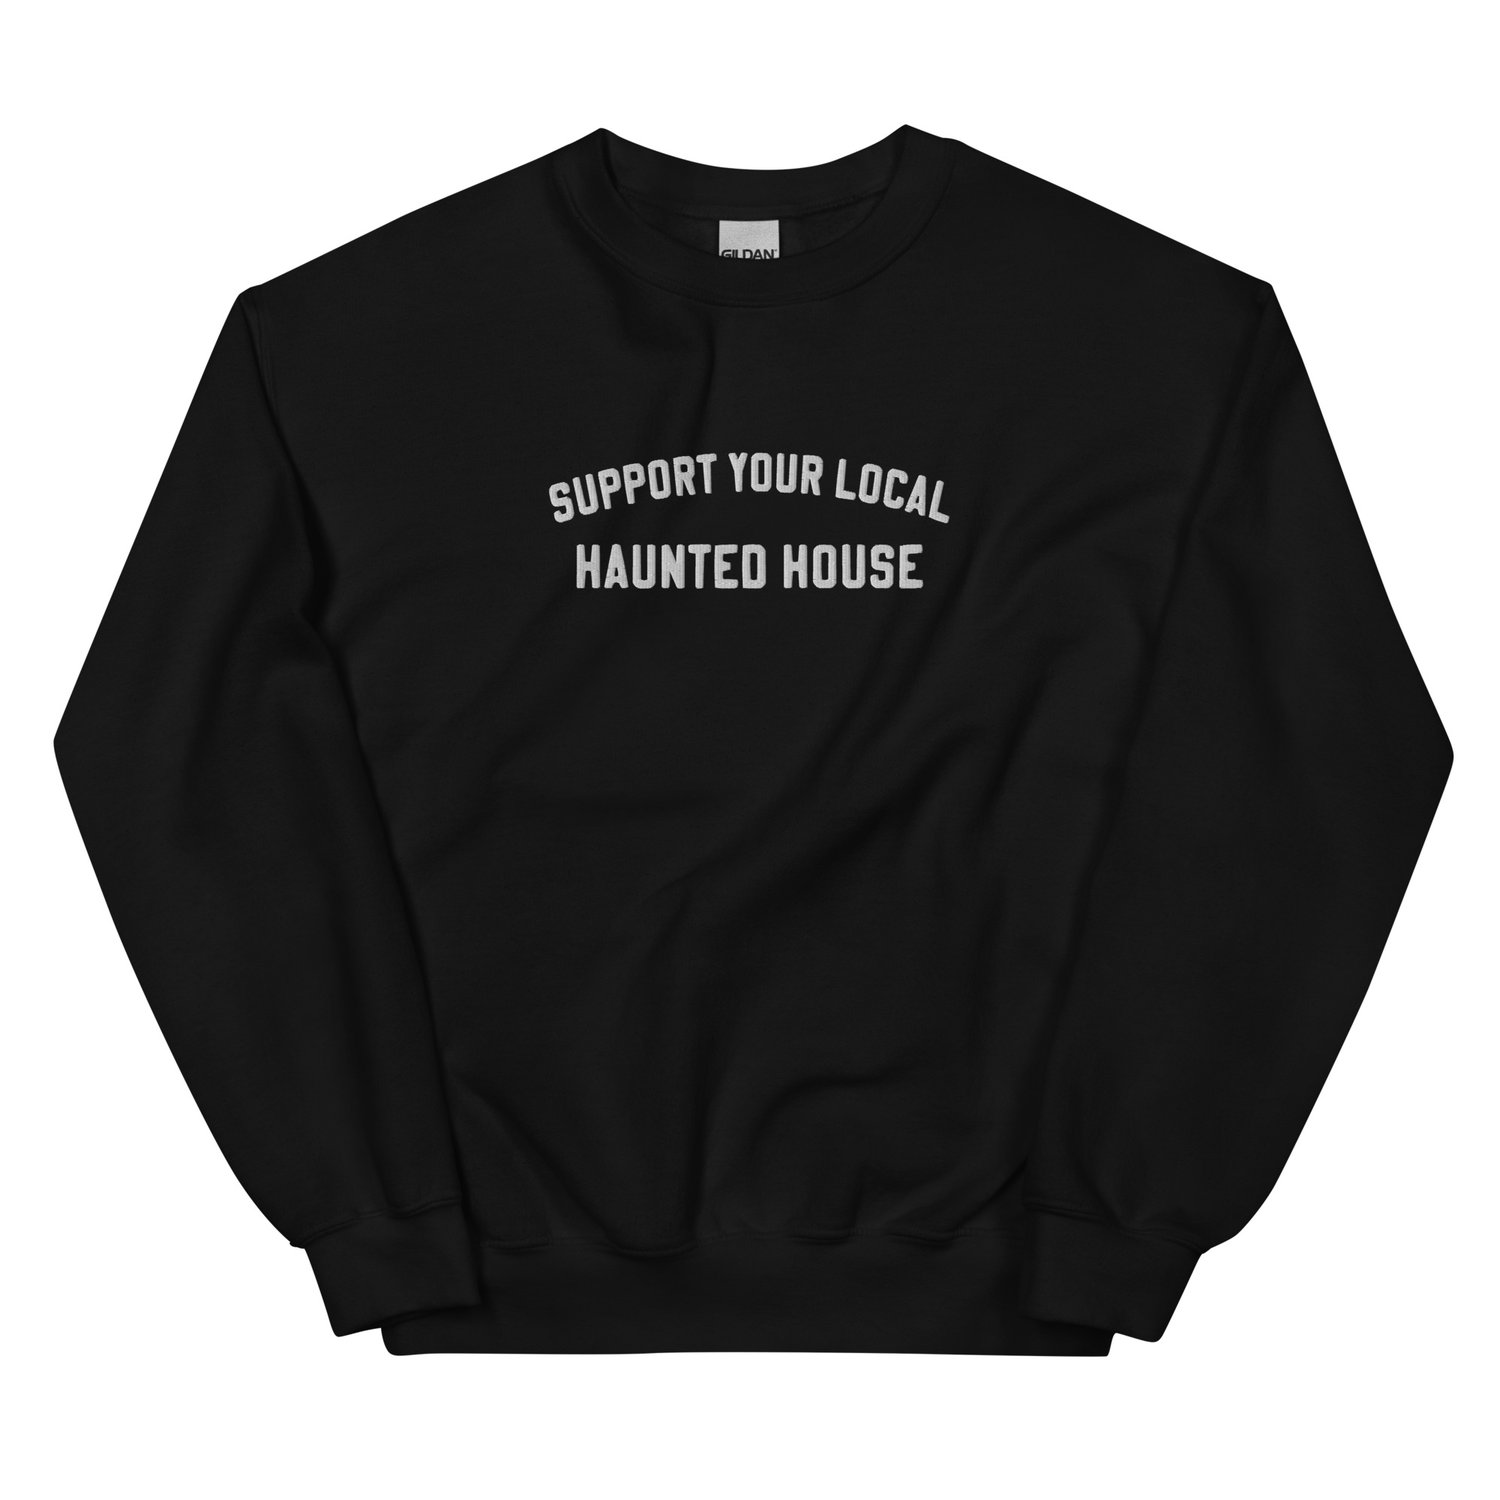 Image of Support Your Local Haunted House embroidered crew neck sweatshirt